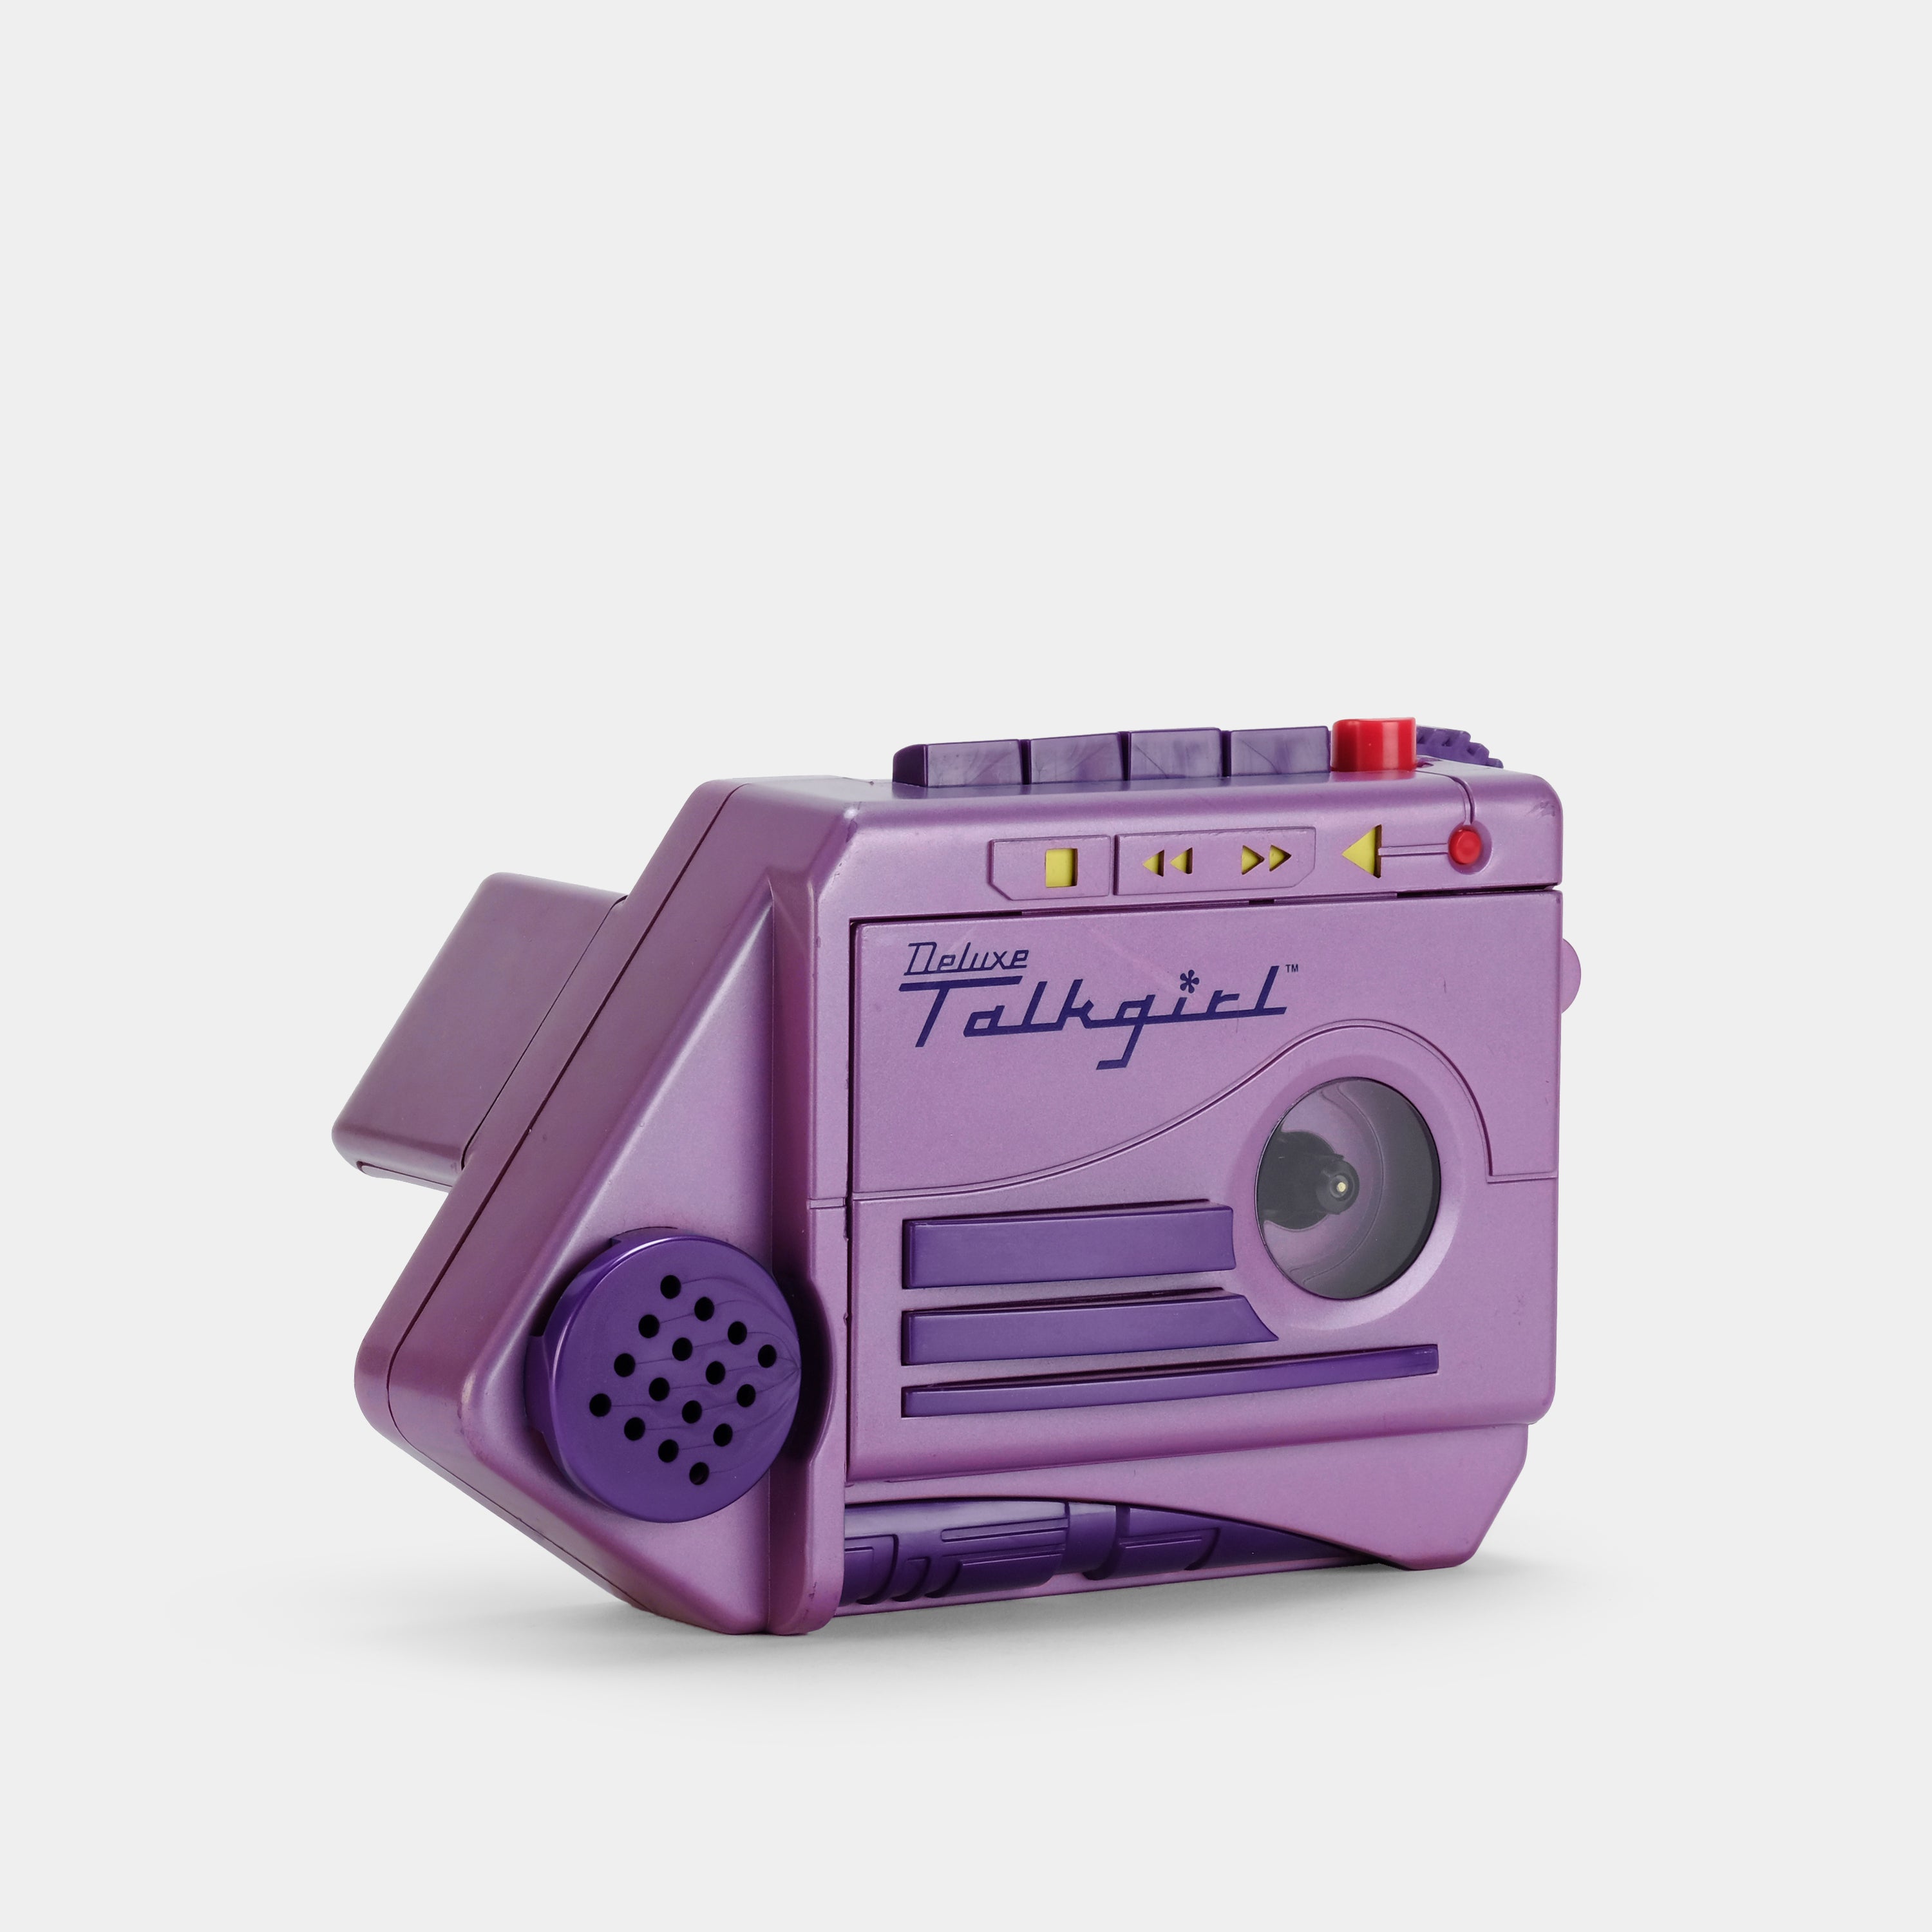 Deluxe Talkgirl Portable Cassette Recorder with Voice Changer